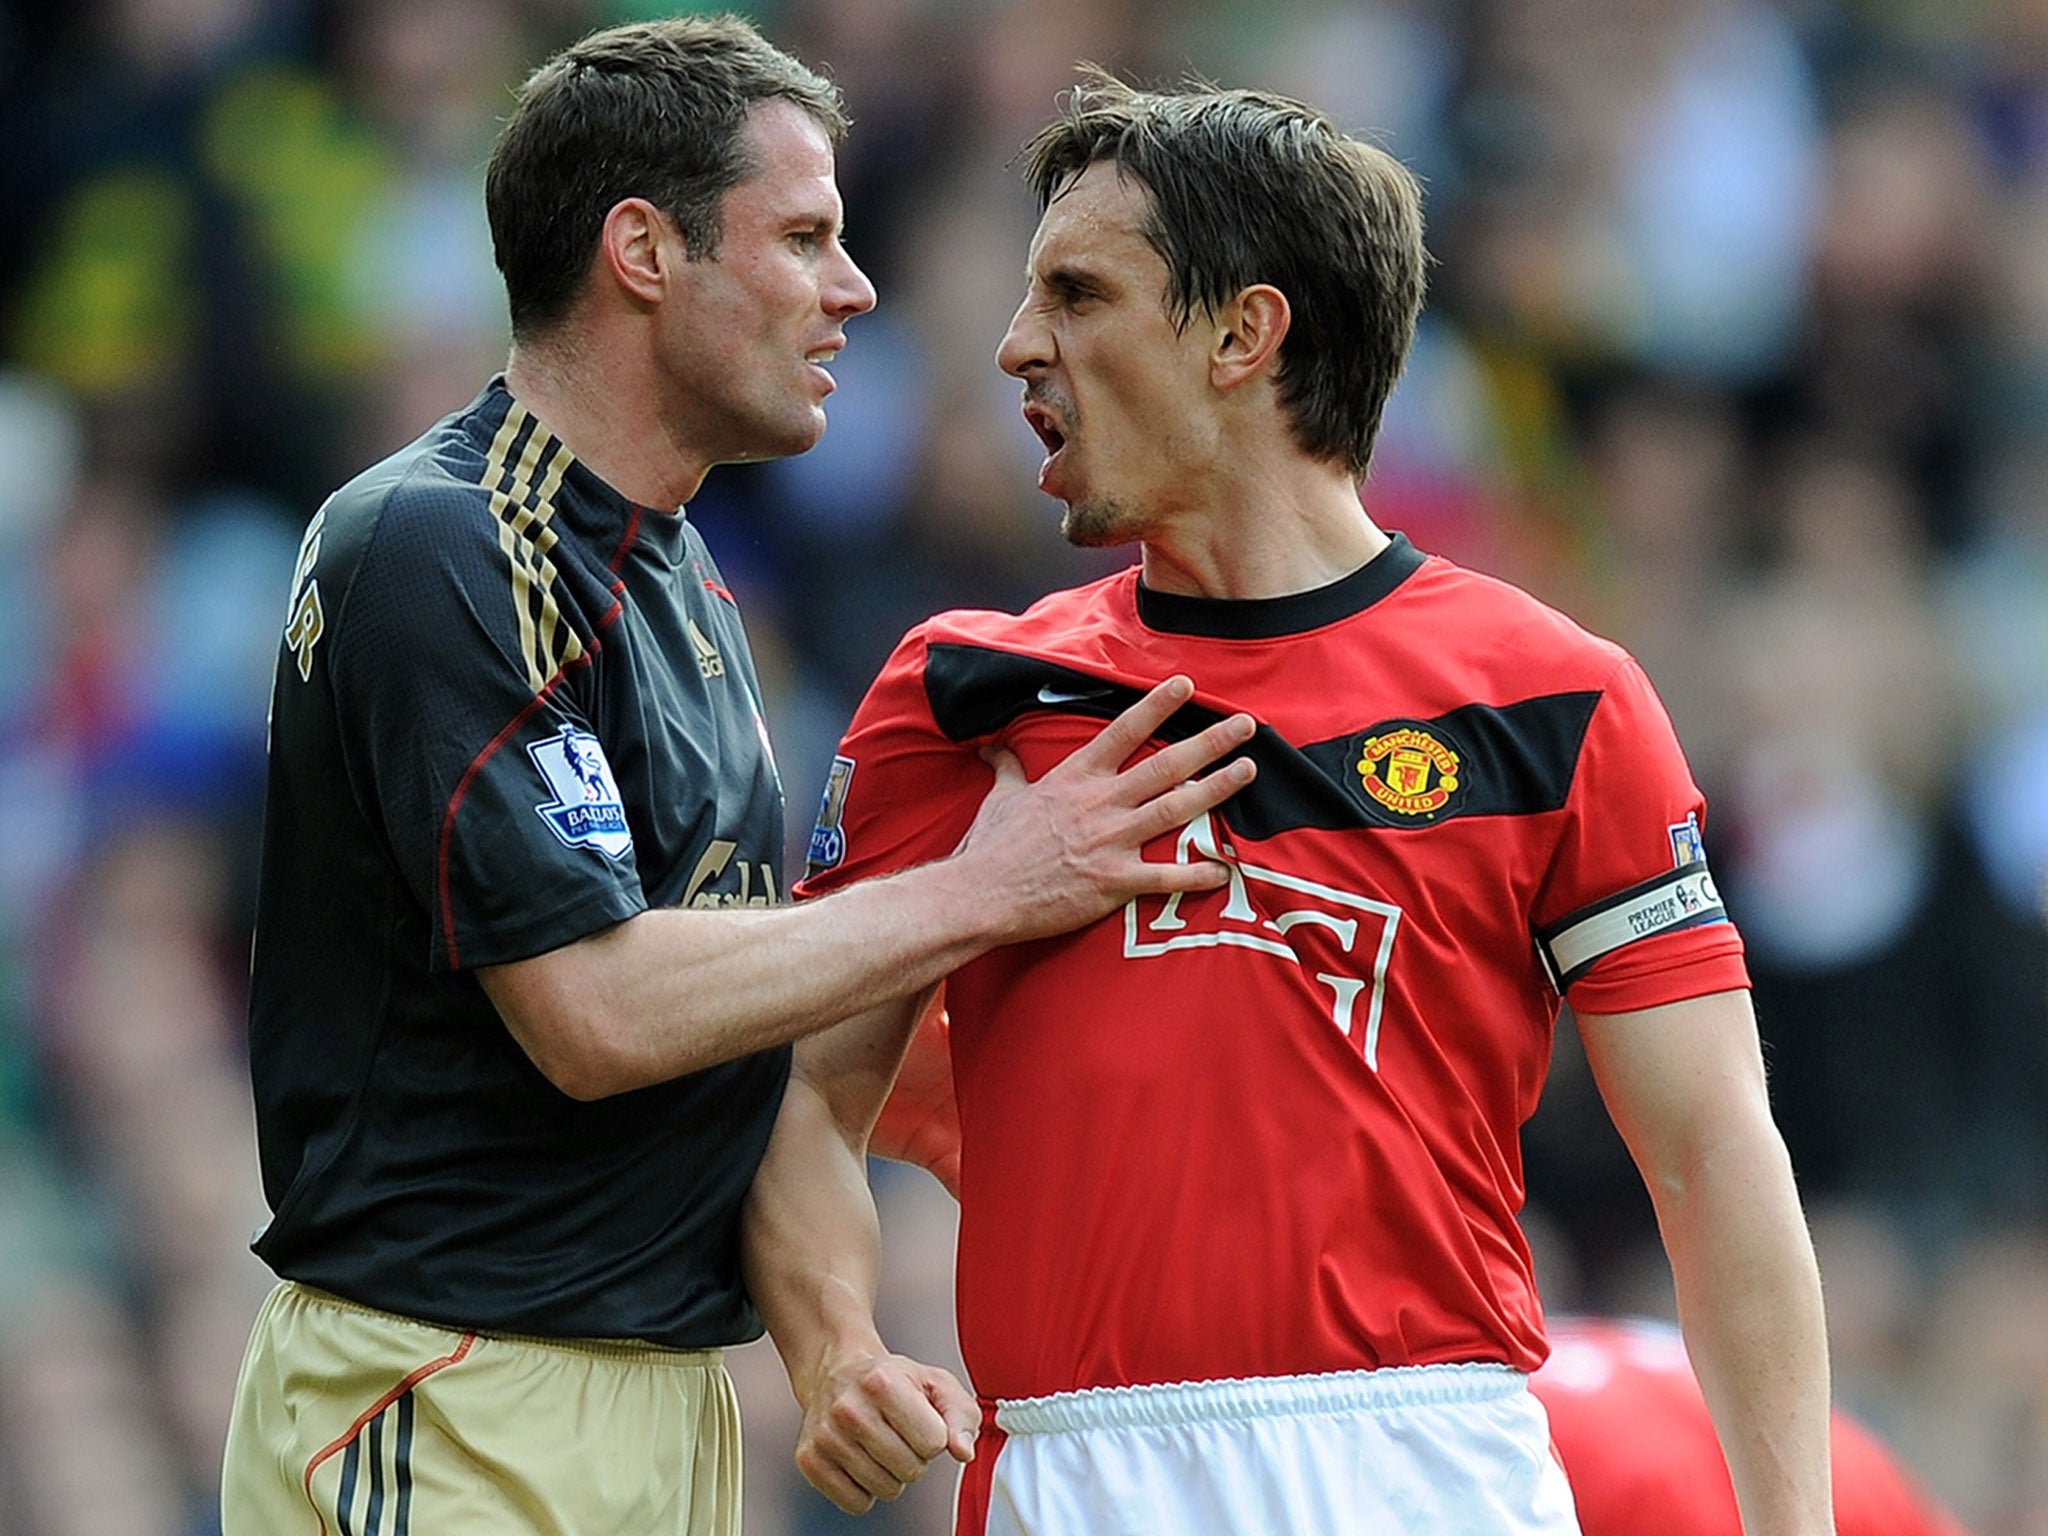 Jamie Carragher and Gary Neville during their Premier League days